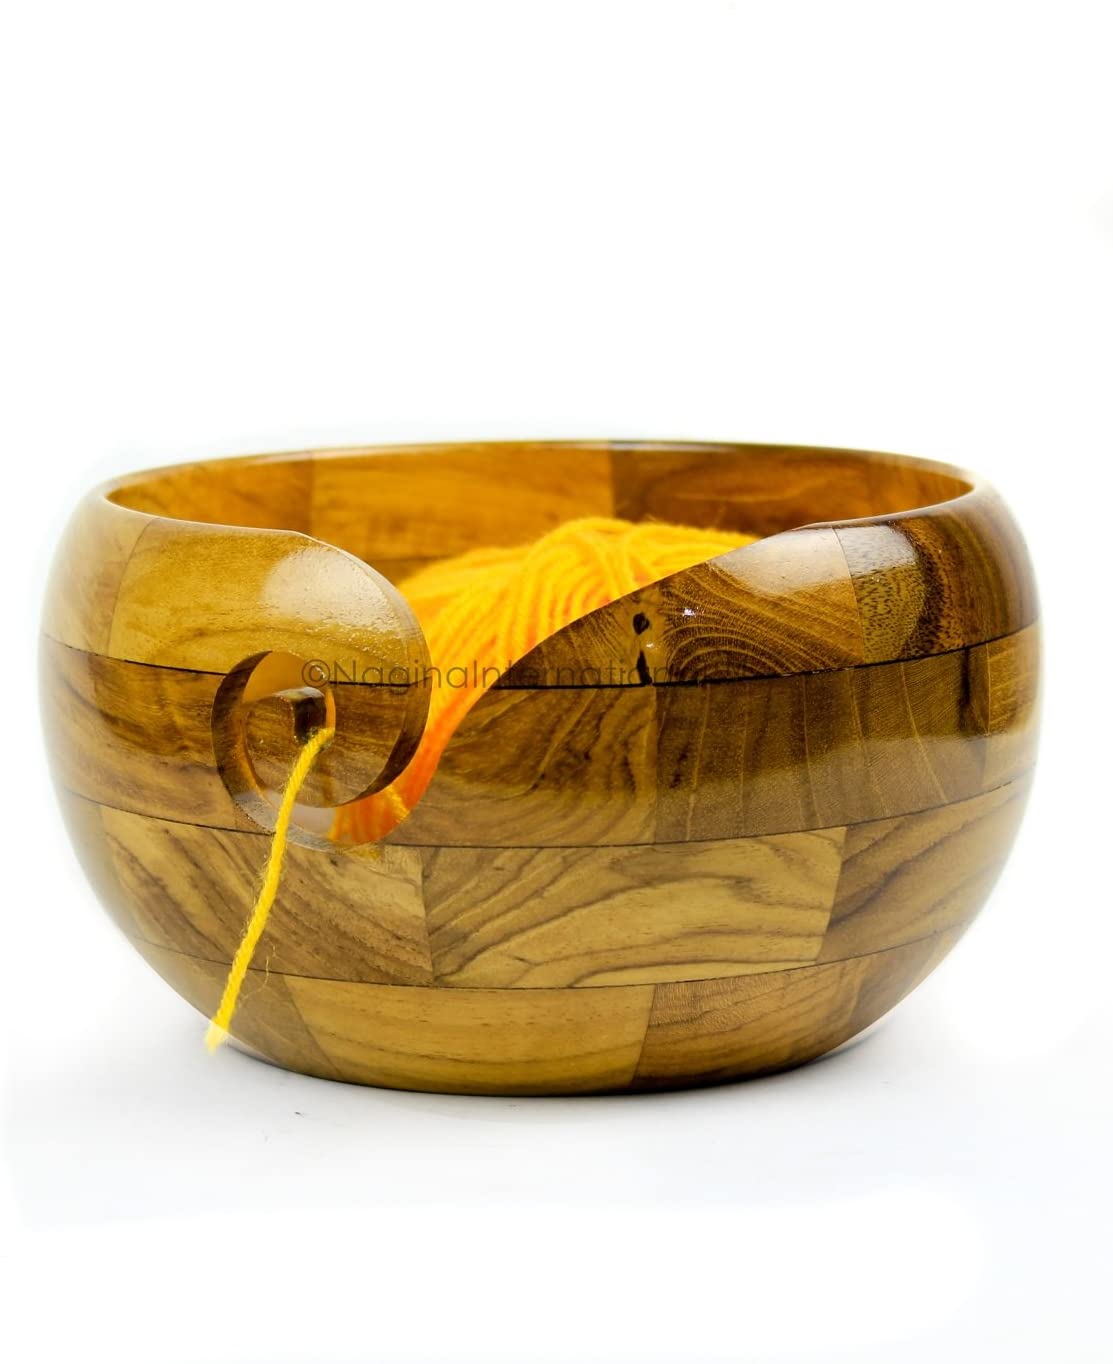 Exquisite Premium Yarn Ball Storage Bowls  Hand Painted Lovely Decor Yet  Functional Yarn Dispenser (Large (7 x 4 x 7 Inches), Almond Brown) 